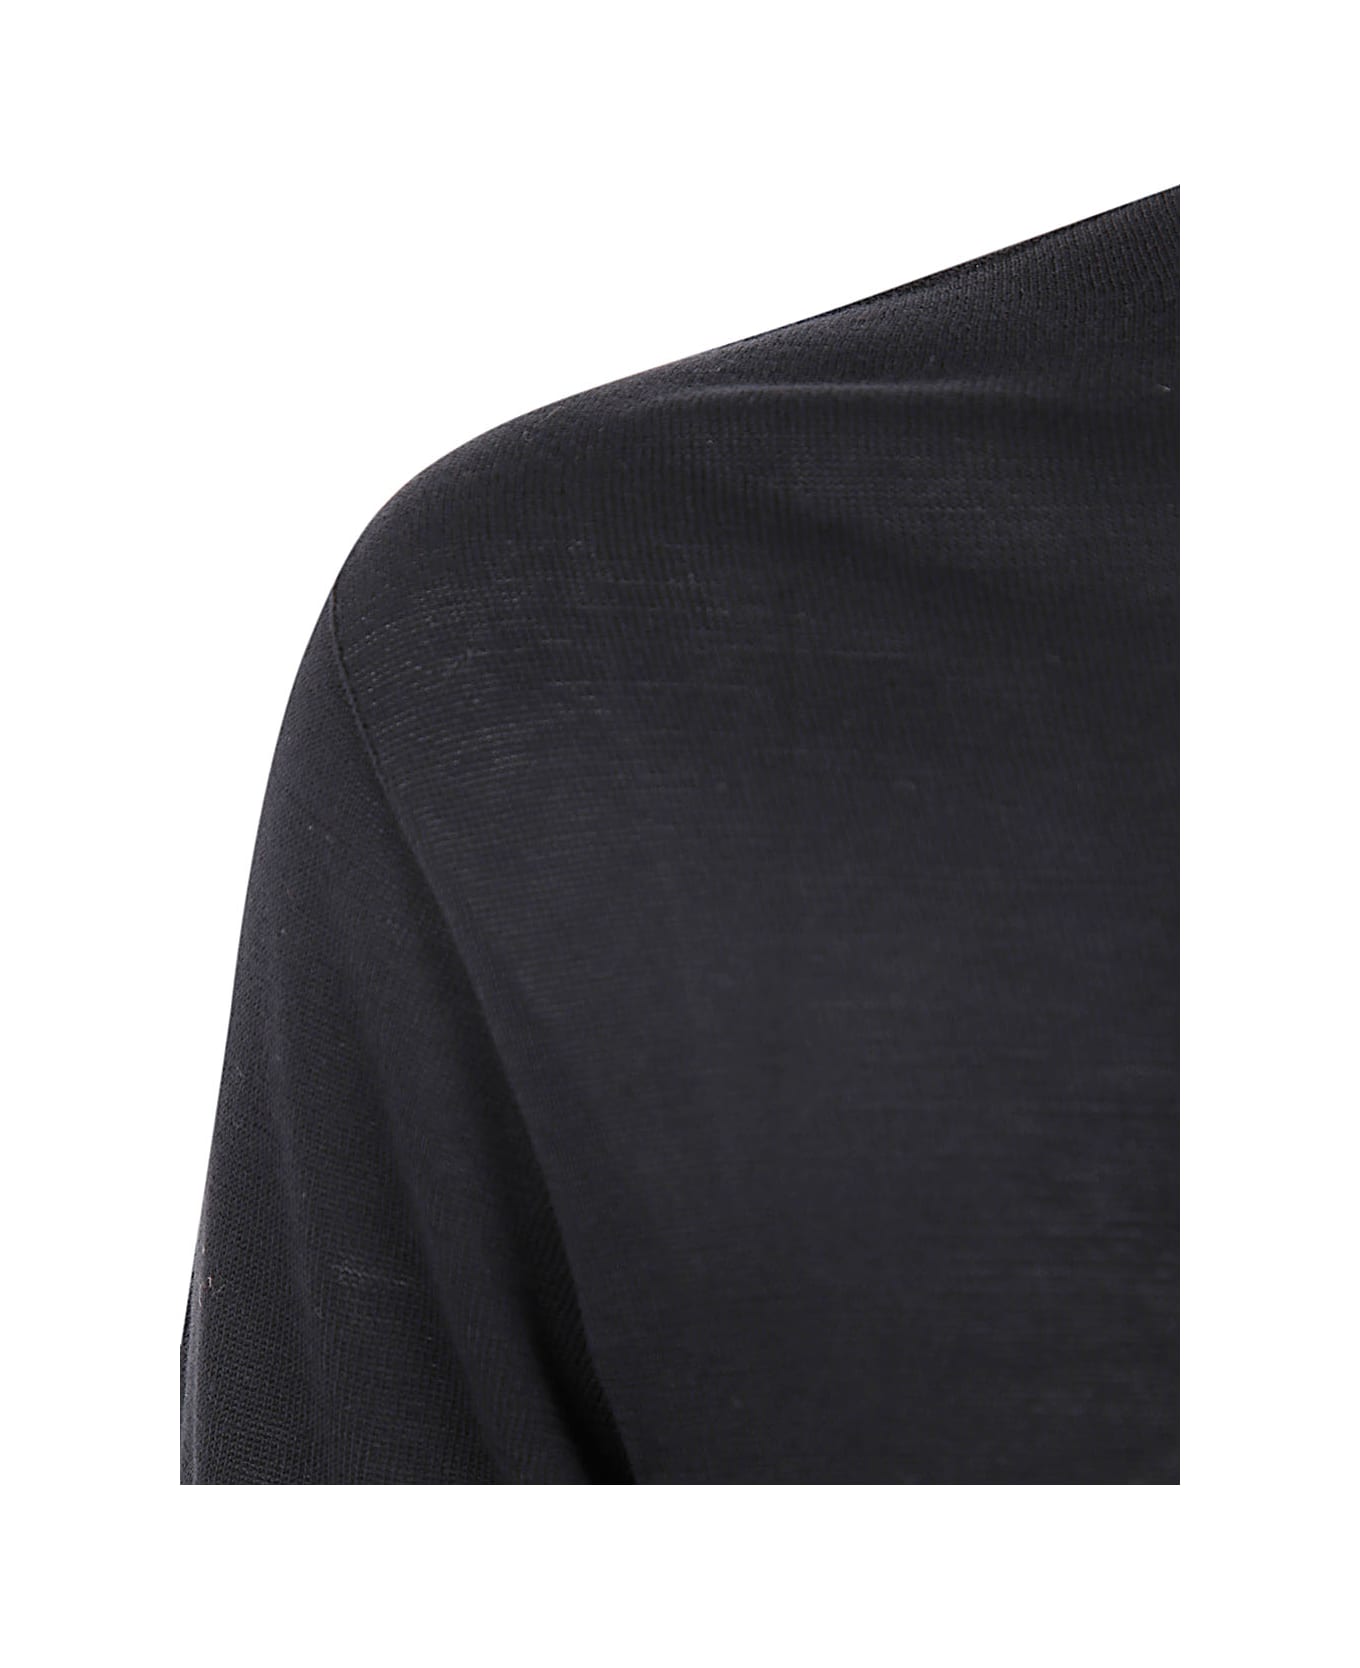 MD75 Classic Round Neck Pullover - Basic Black シャツ